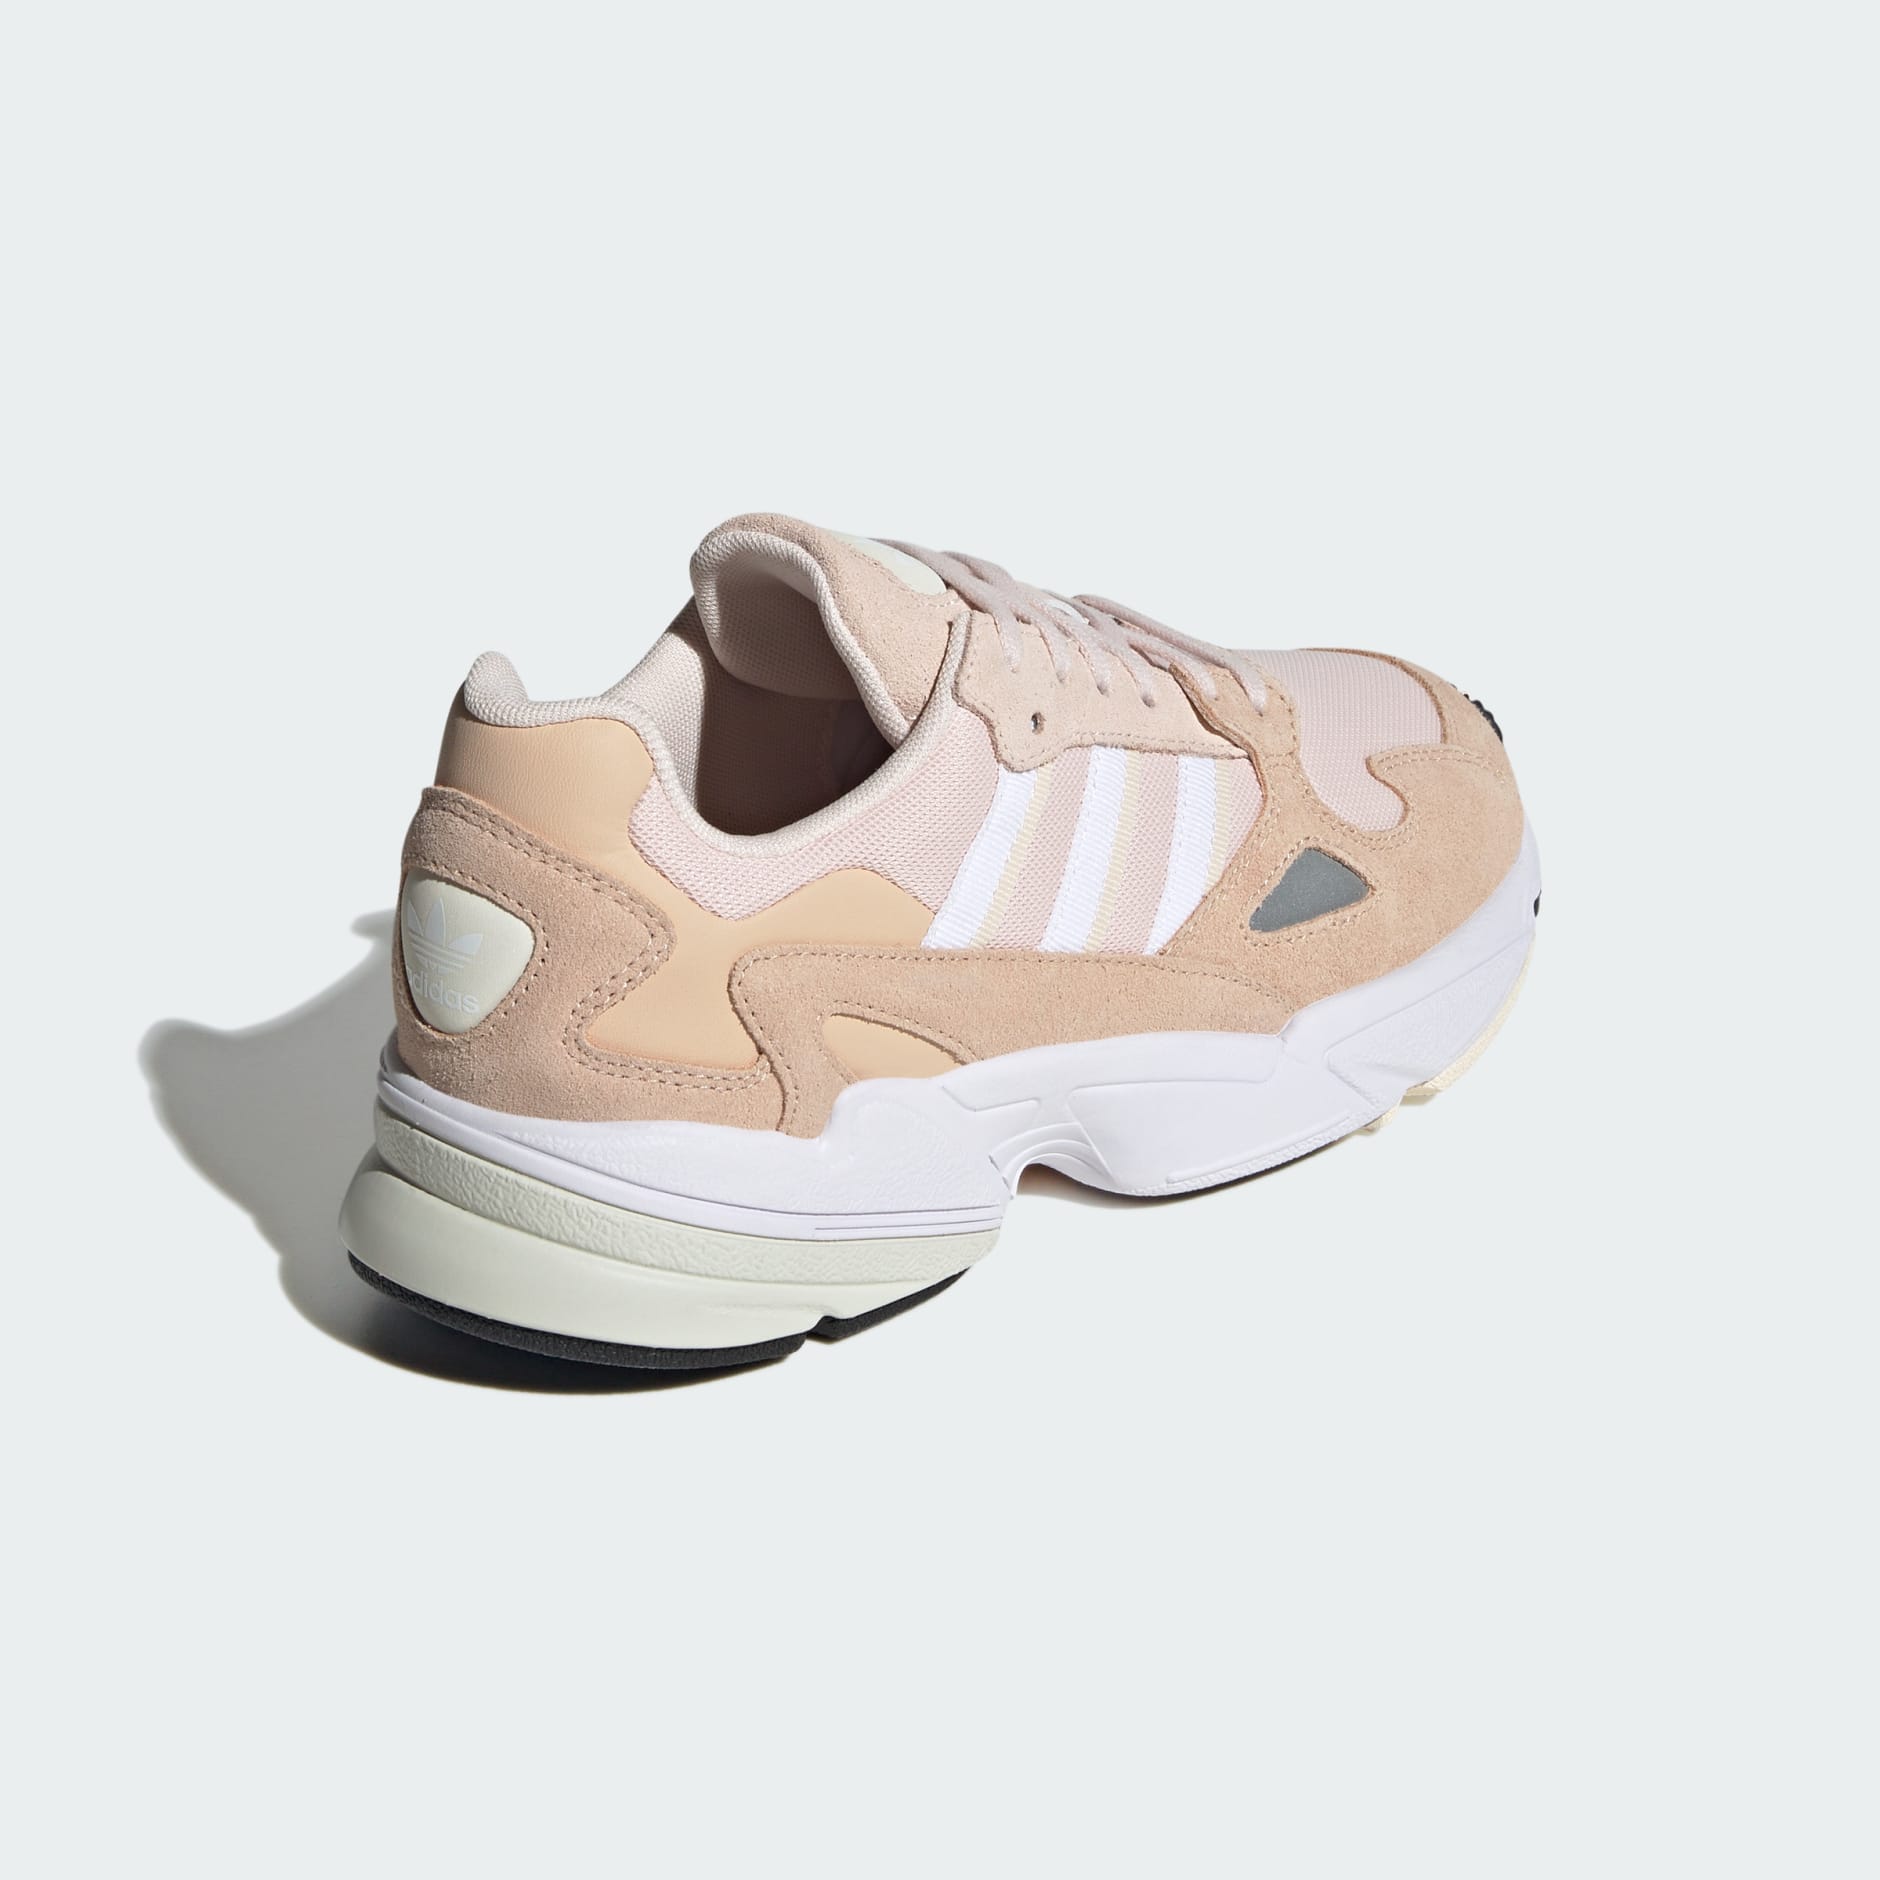 Adidas Originals Falcon Sneakers | I Bought Kylie Jenner's Favourite Adidas  Sneakers — They're the Comfiest, Cutest Shoes Ever | POPSUGAR Fashion UK  Photo 4